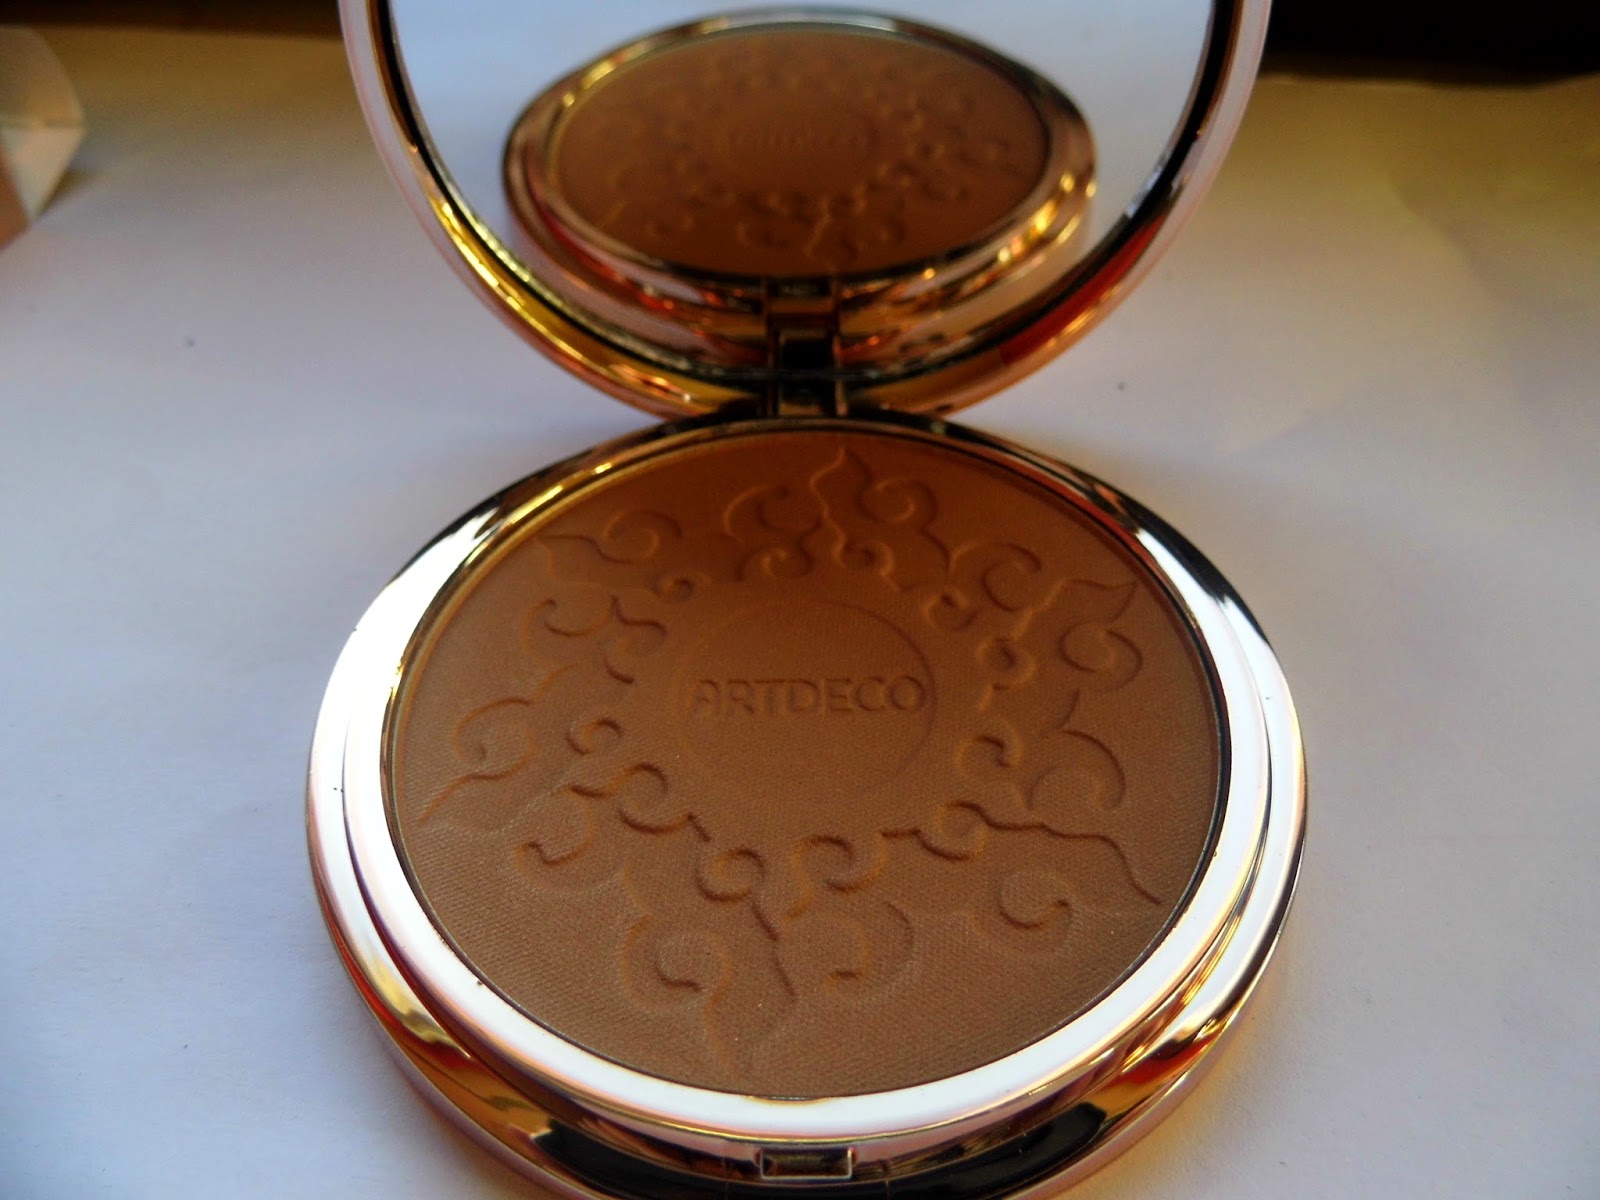 artdeco-bronzing-compact-powder-swatch-here-comes-the-sun-summer-2015-collection-picture